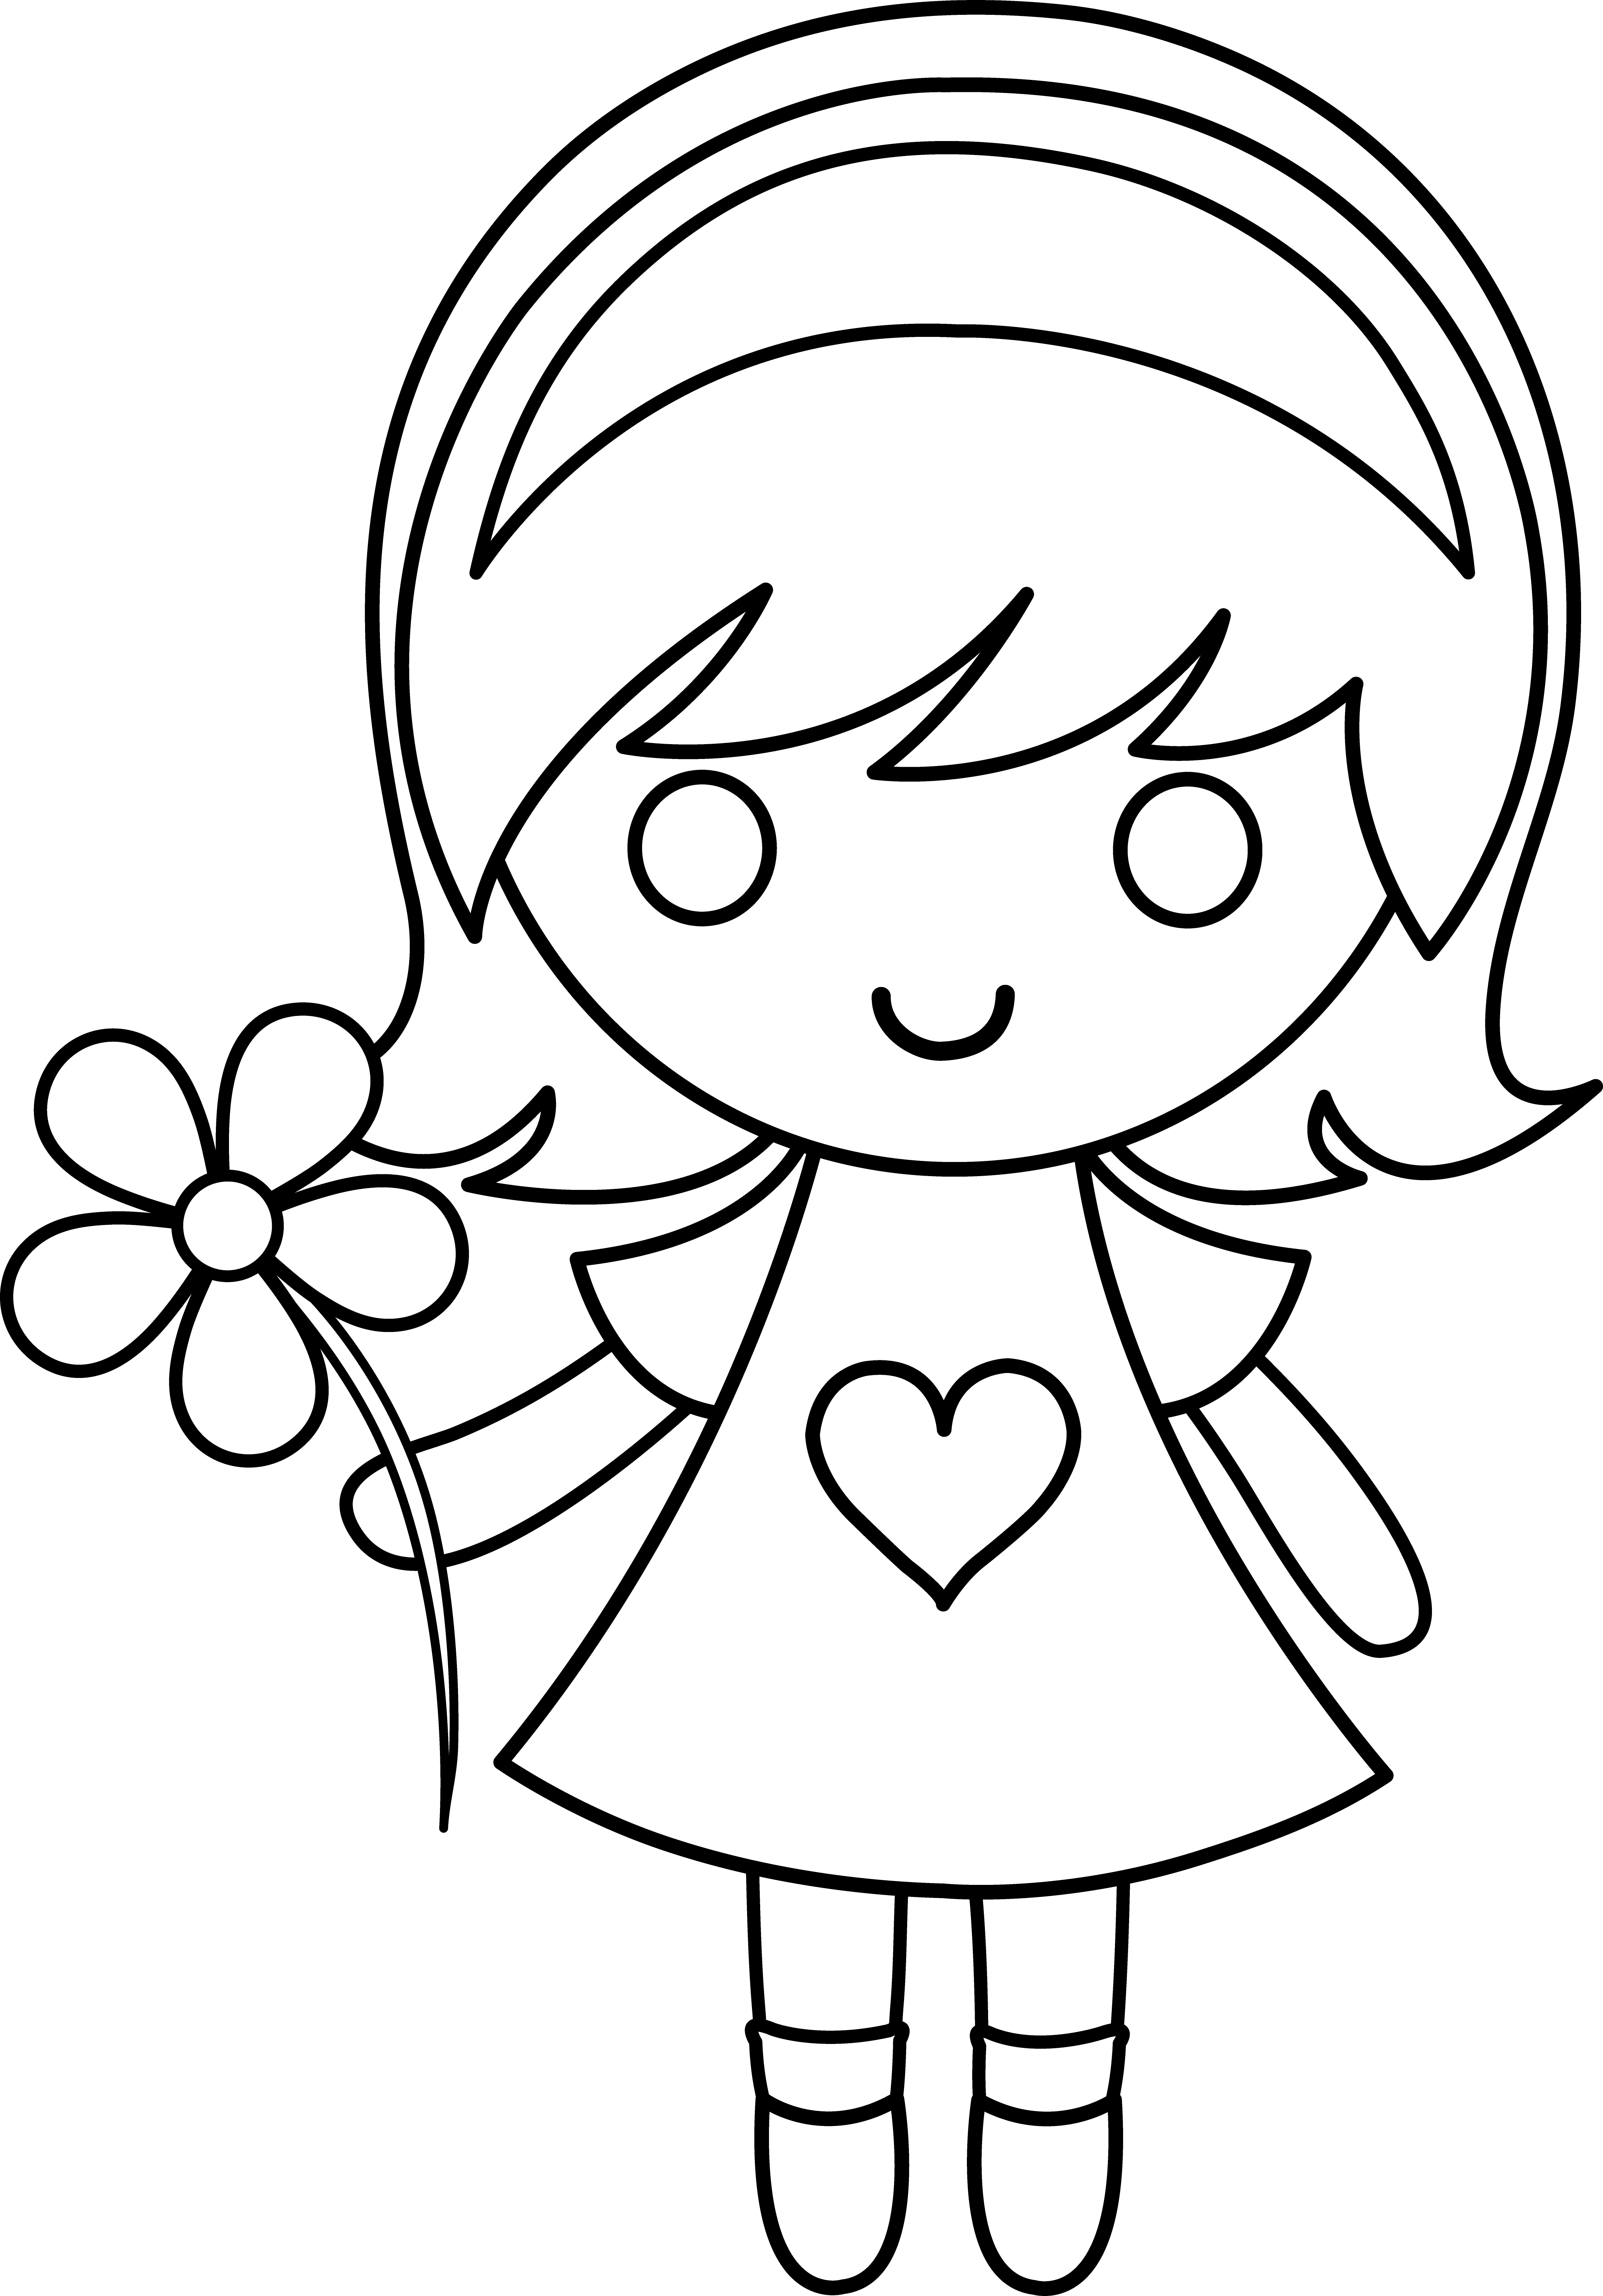 Images For > Daisy Outline Template